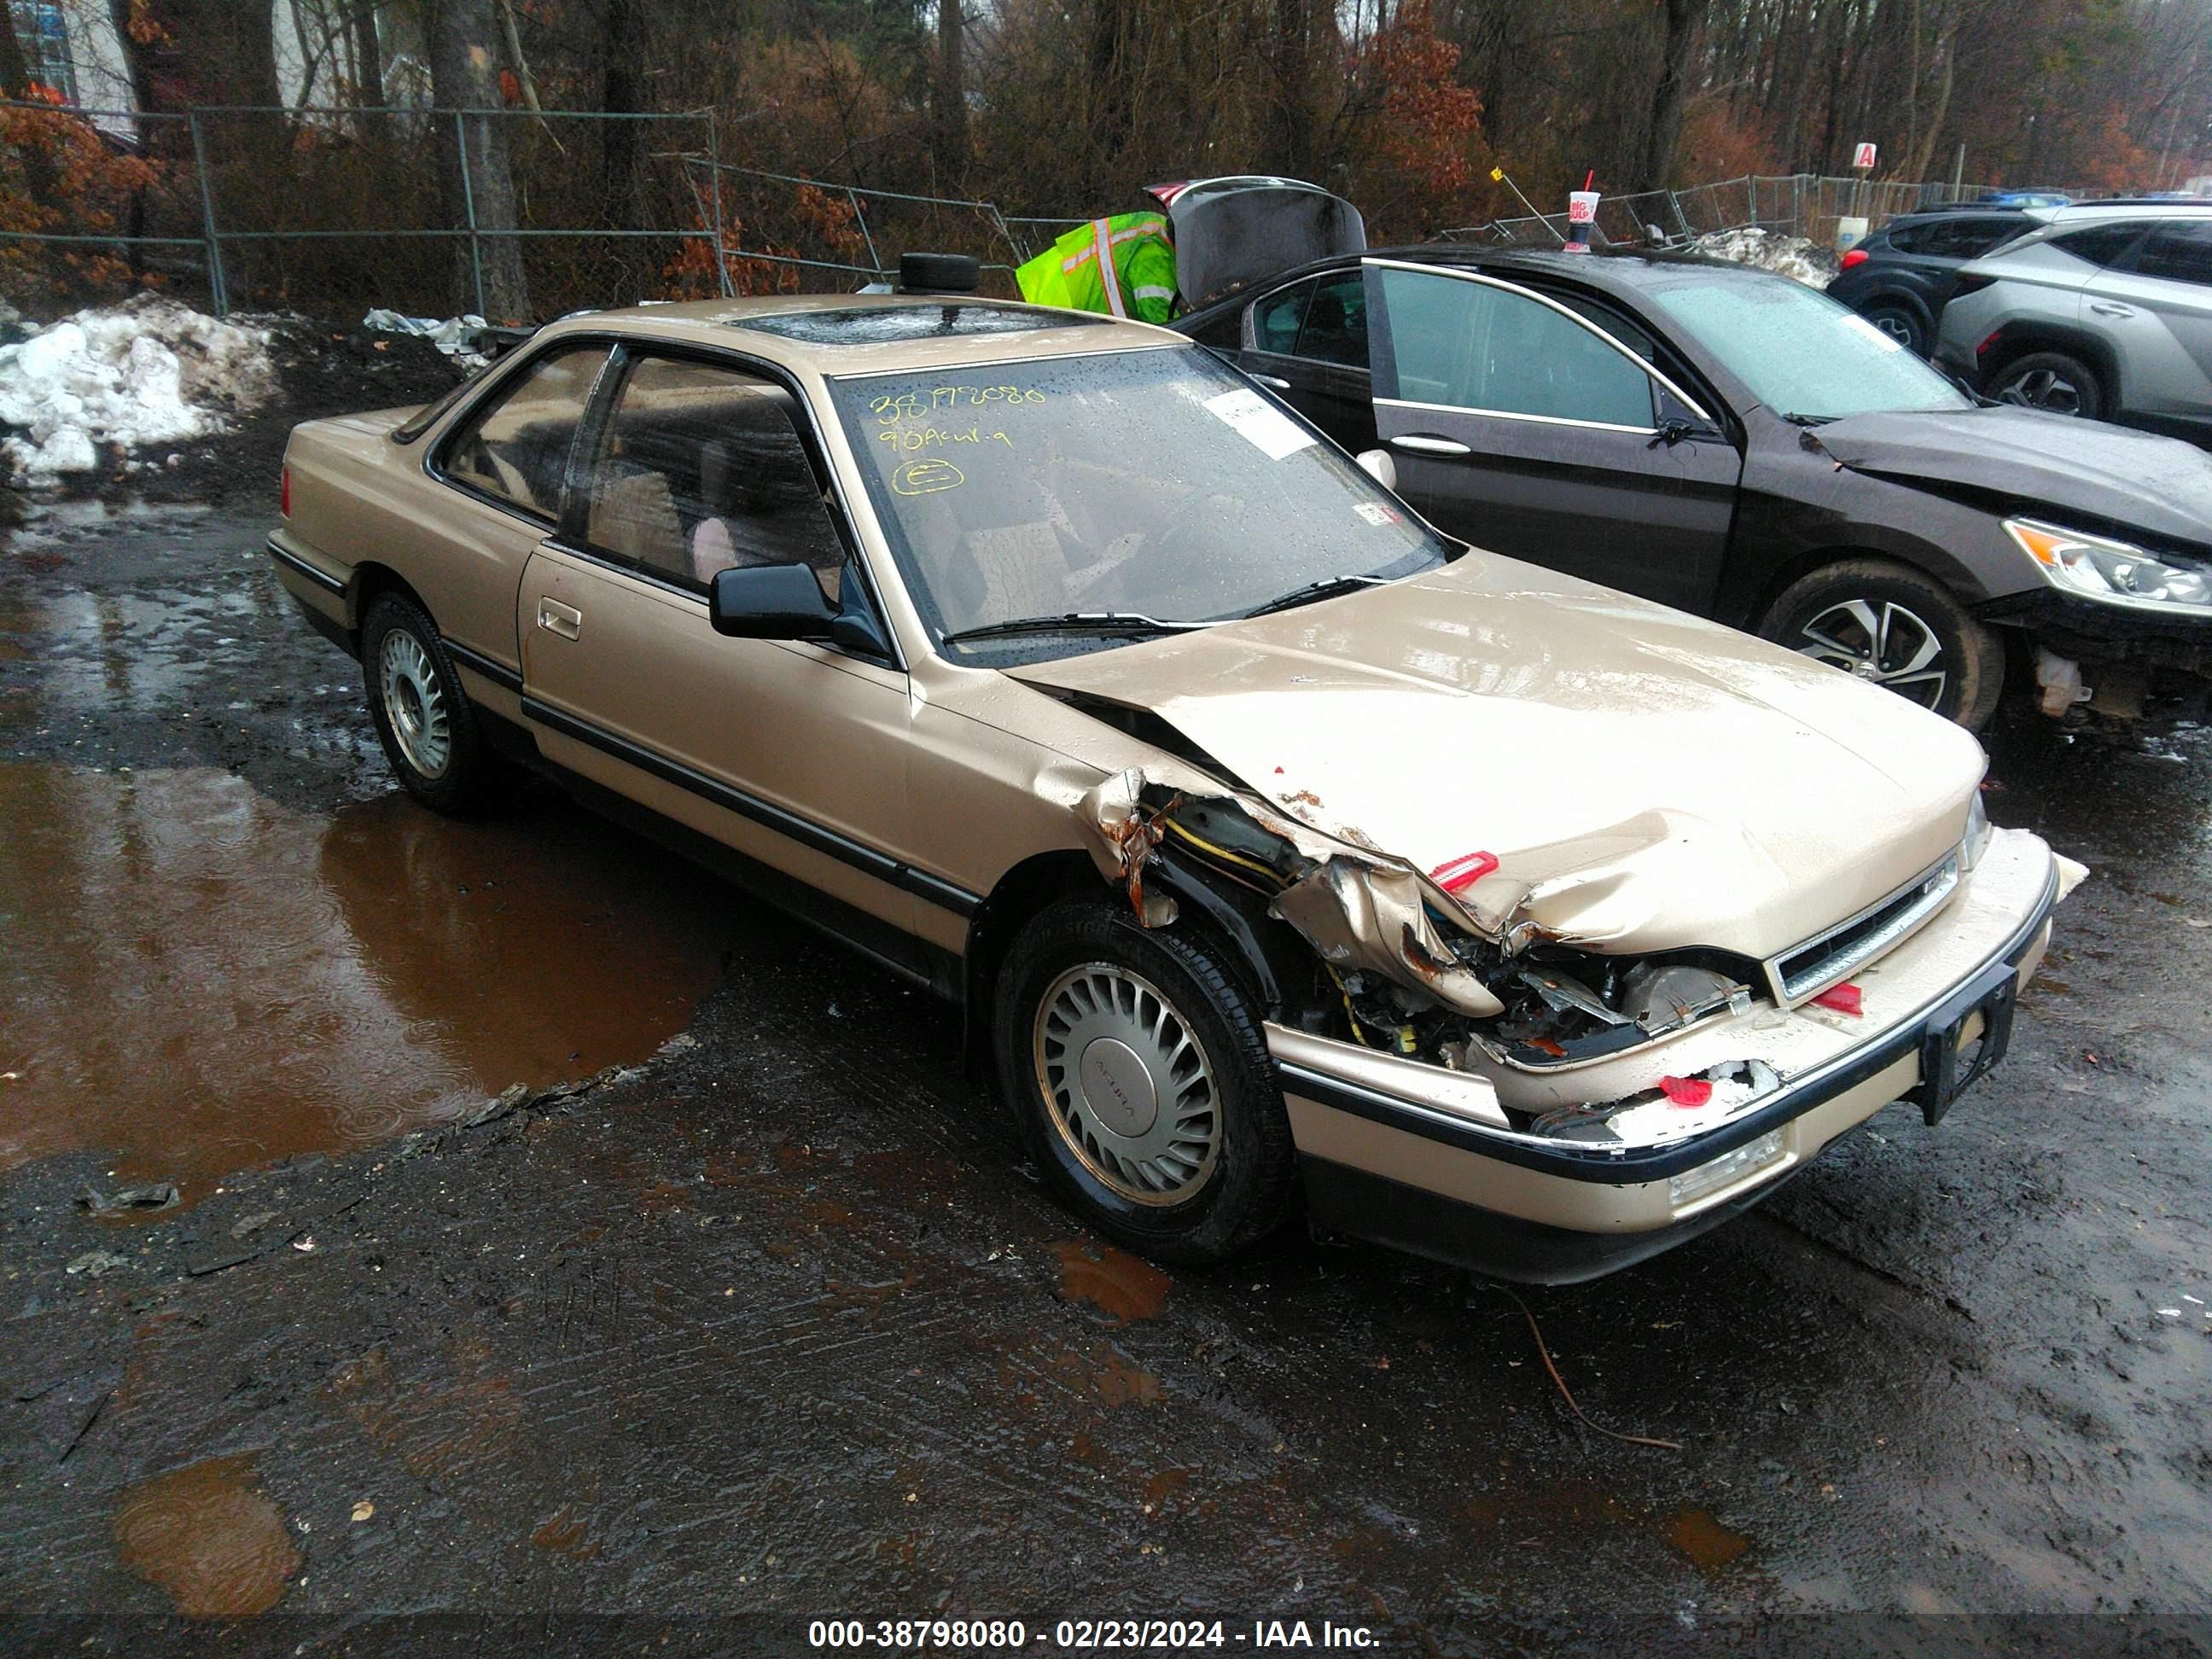 vin: JH4KA3244LC007199 JH4KA3244LC007199 1990 acura legend 2700 for Sale in 11763, 21 Rice Ct, Medford, USA